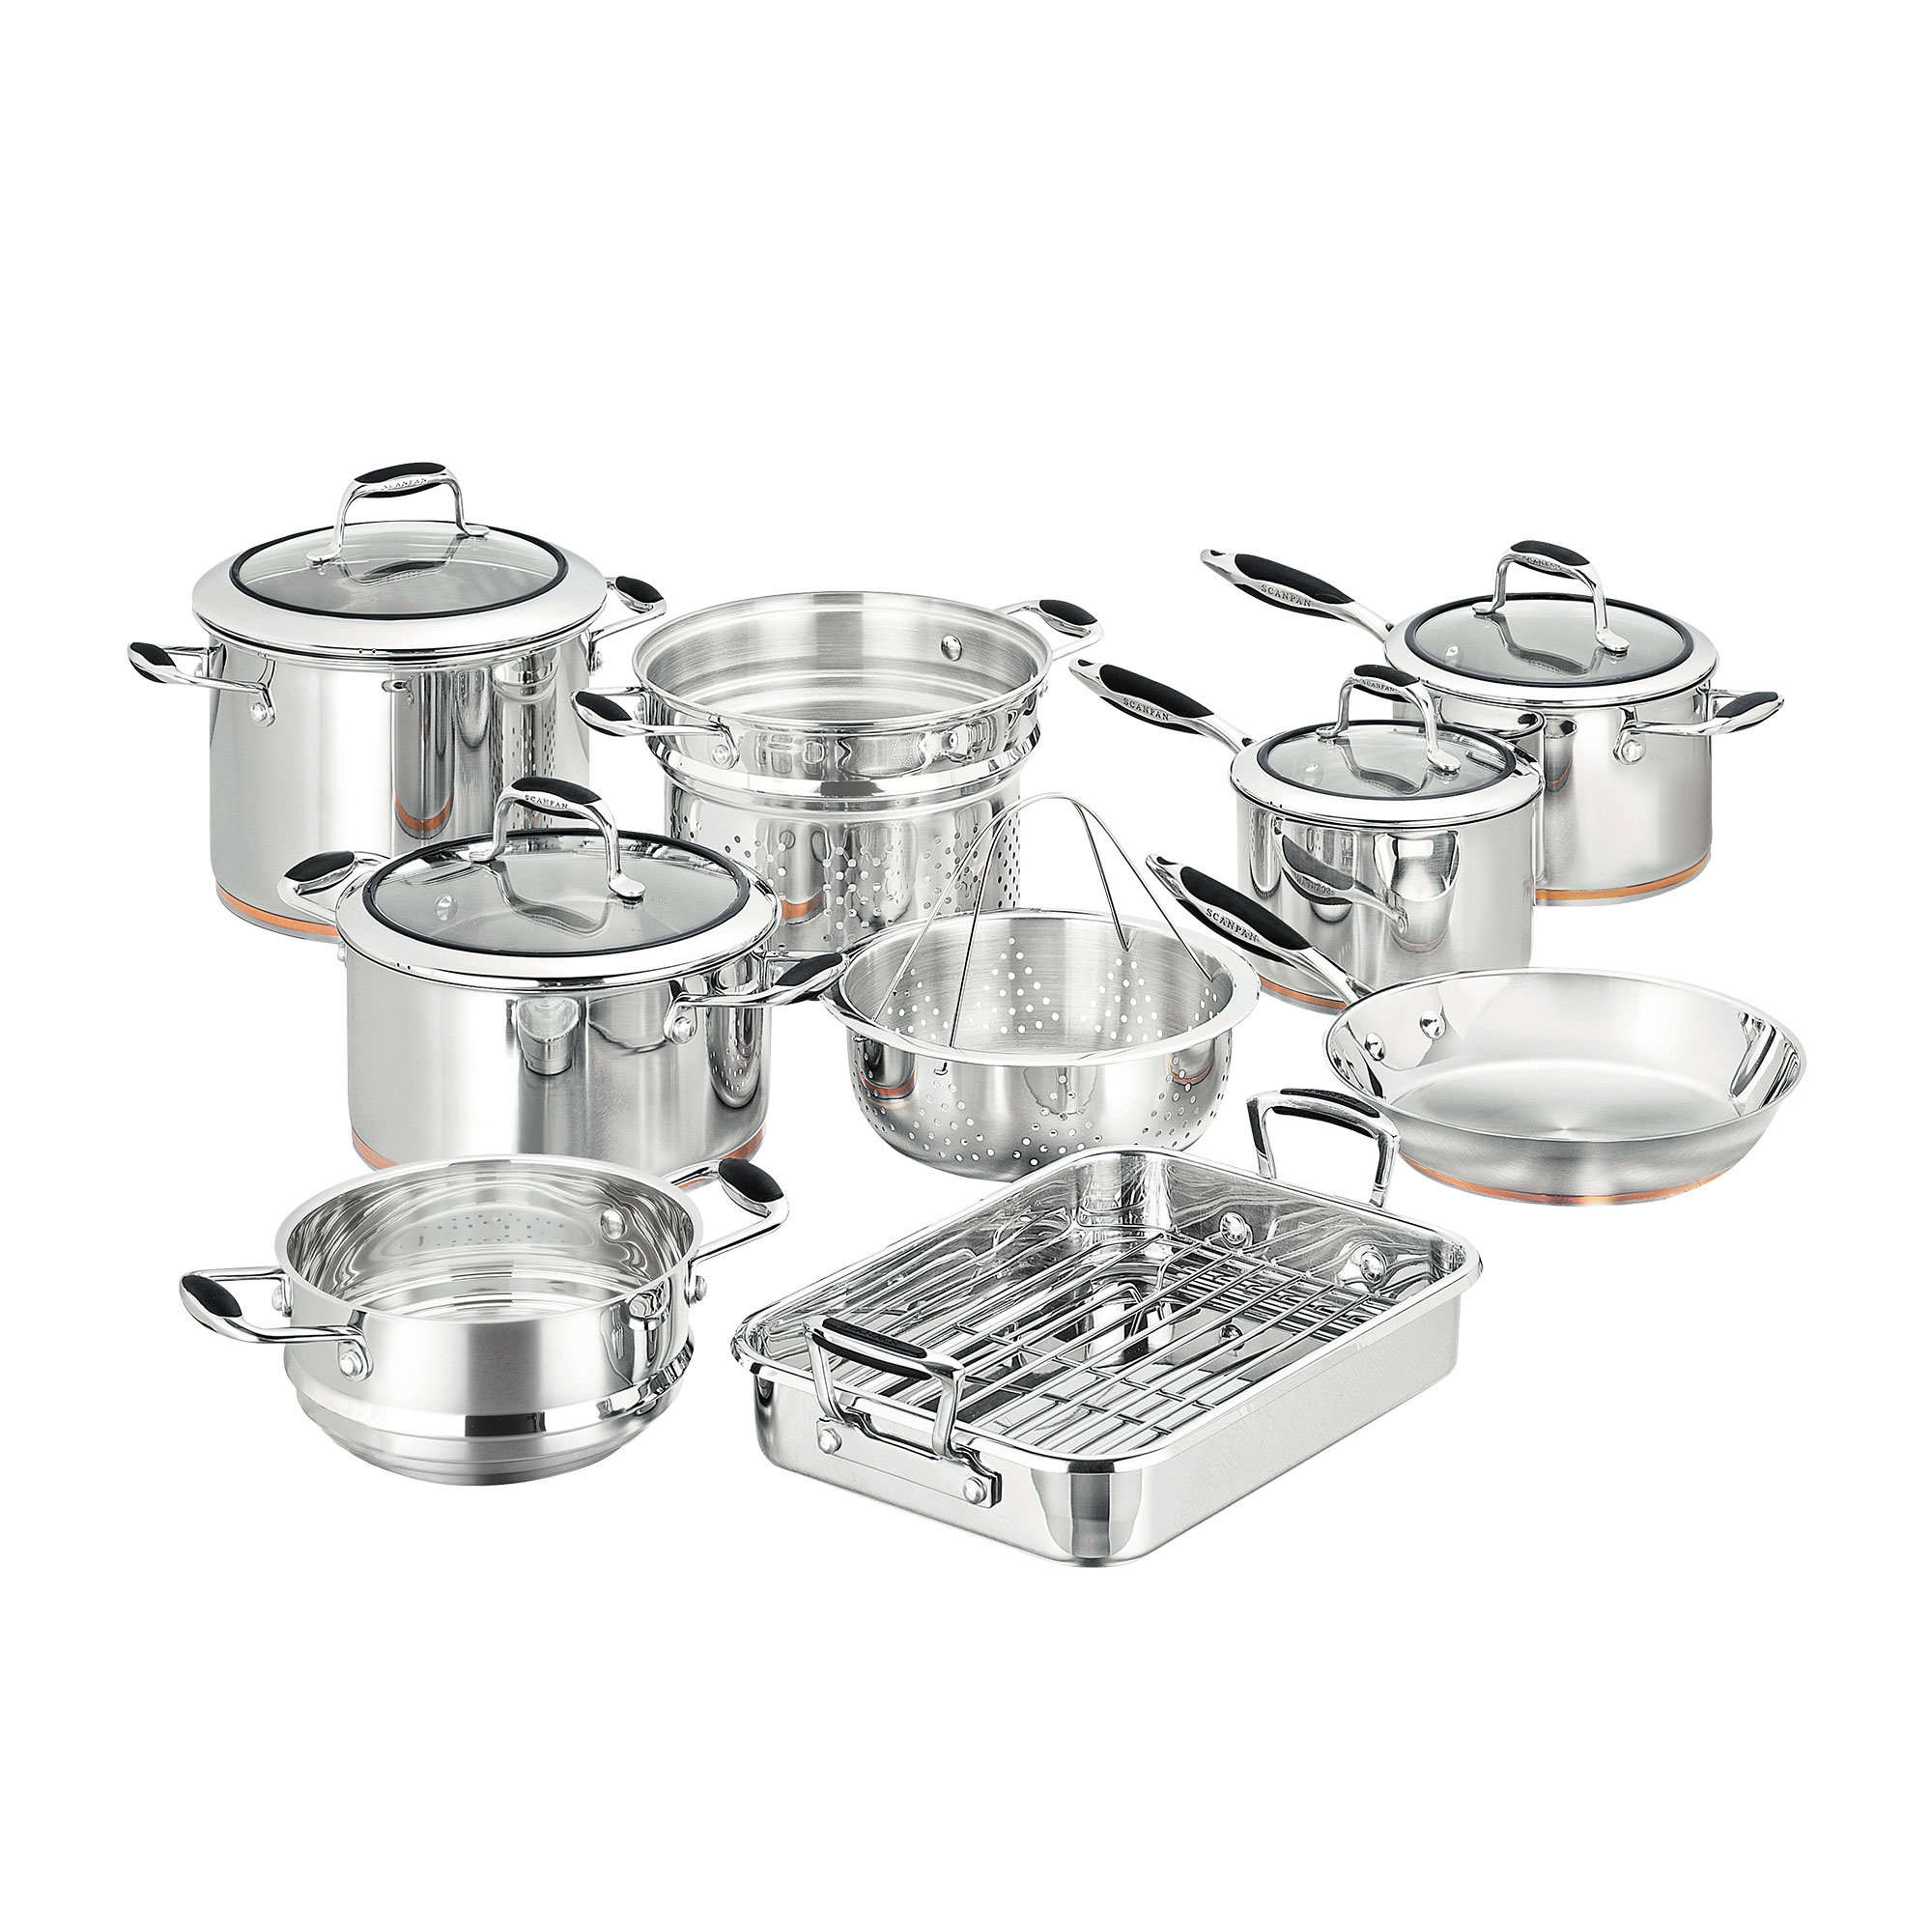 Scanpan Coppernox 9pc Stainless Steel Cookware Set Image 1